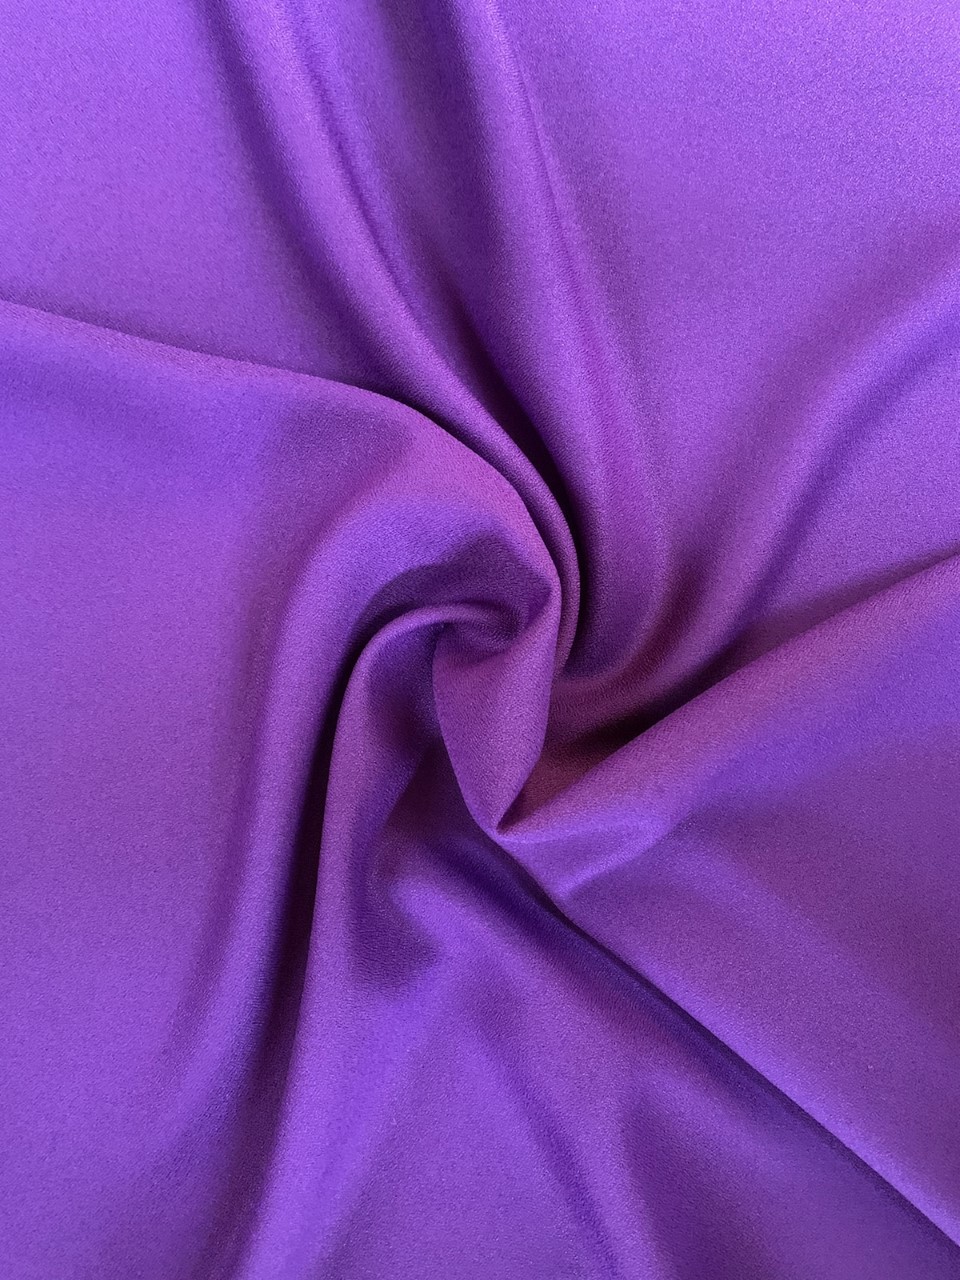 Purple Crepe Fabric - 60" by the yard (100% polyester)